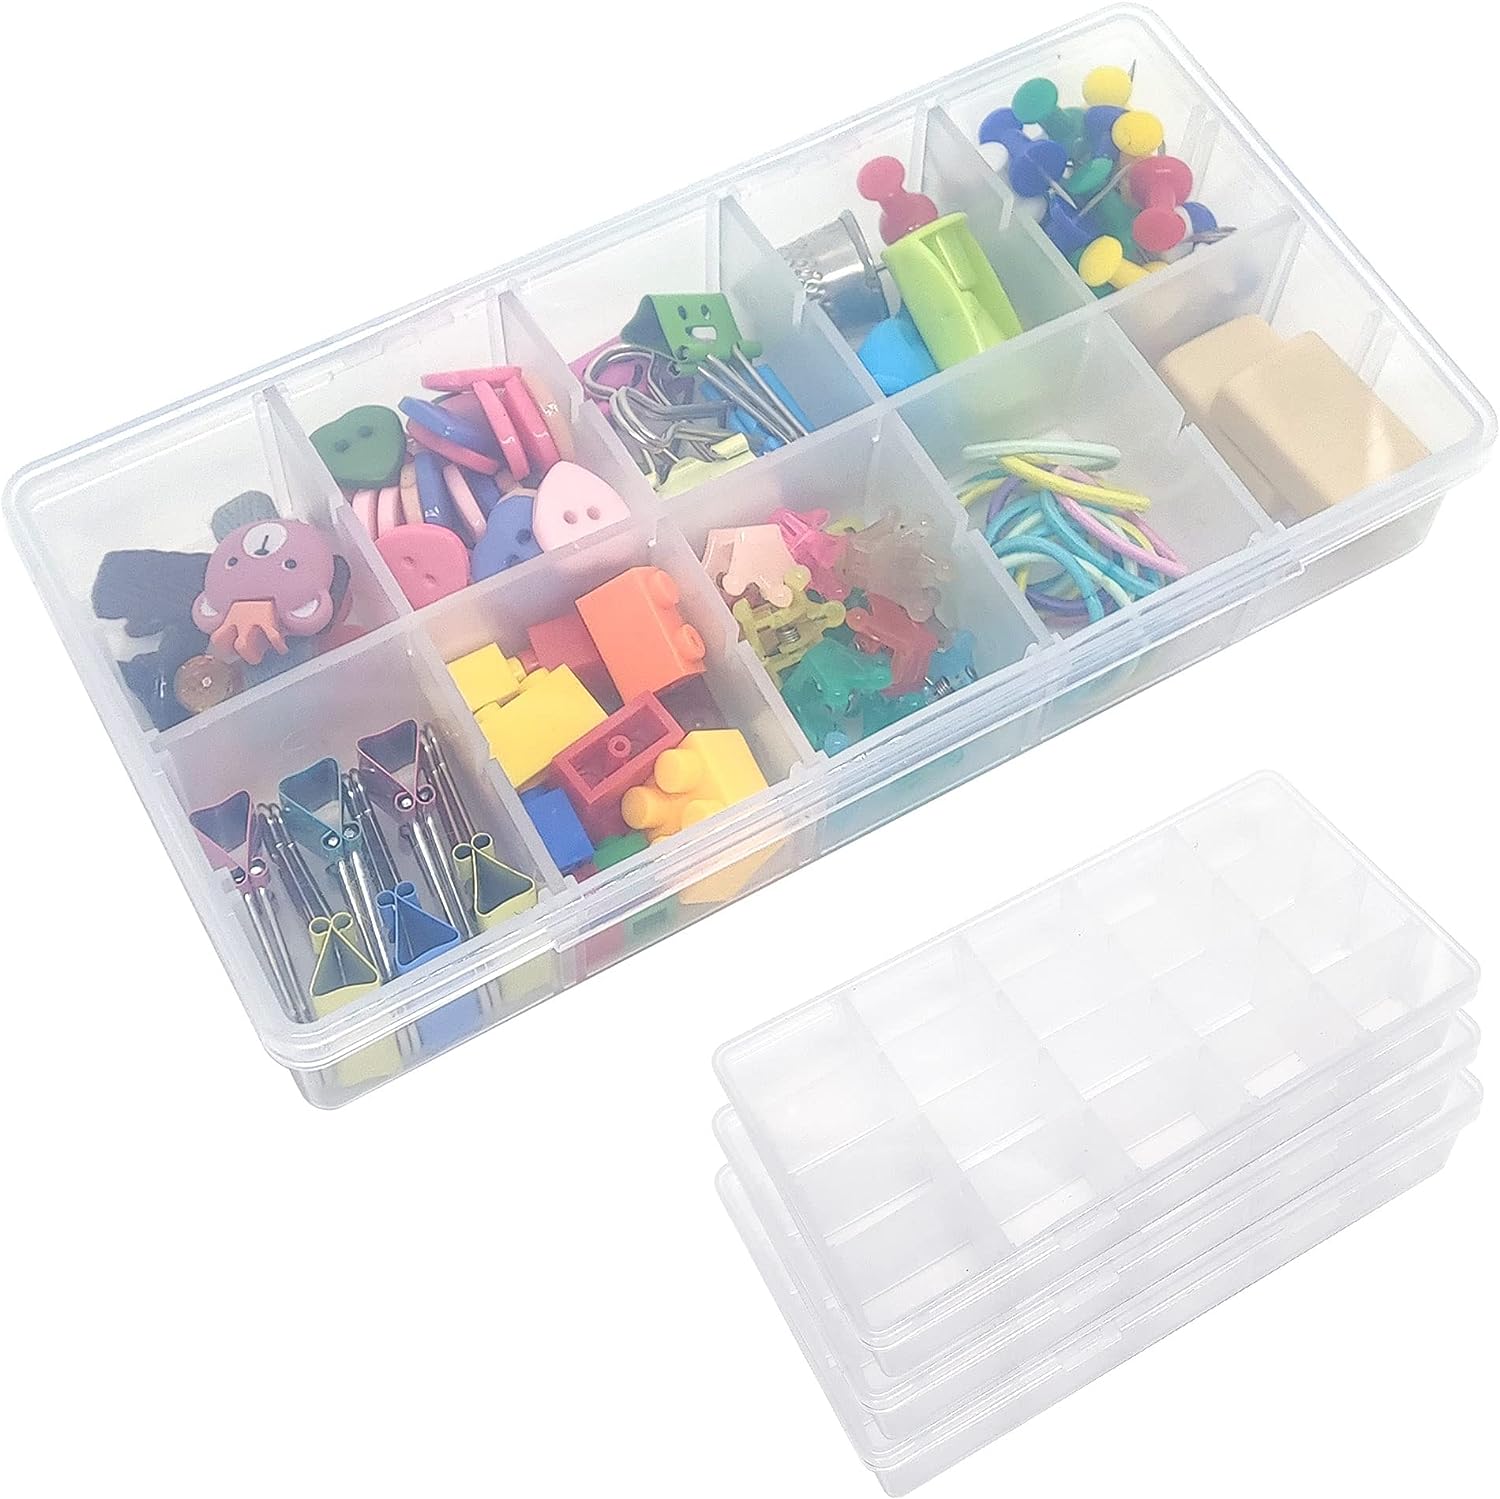 SGHUO 18 Compartment Organizer Box with Adjustable Dividers, 4 Pack Plastic Storage Container for Jewelry, Craft DIY, Bead, Sewing, Dip Powder, Hair